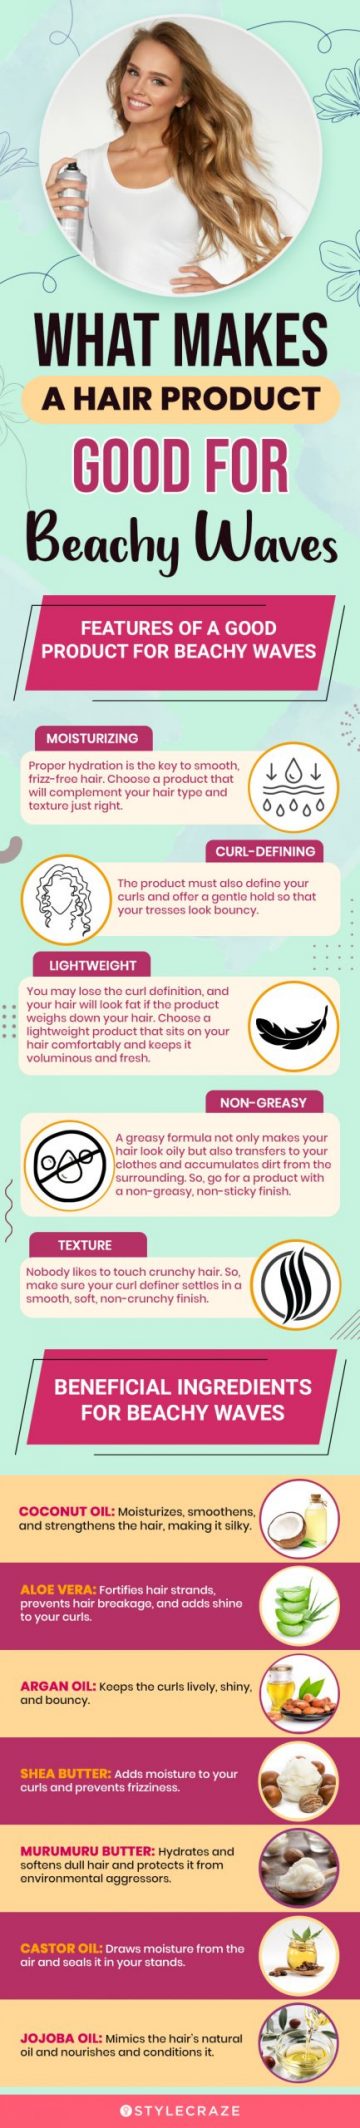  What Makes A Hair Product Good For Beachy Waves (infographic)